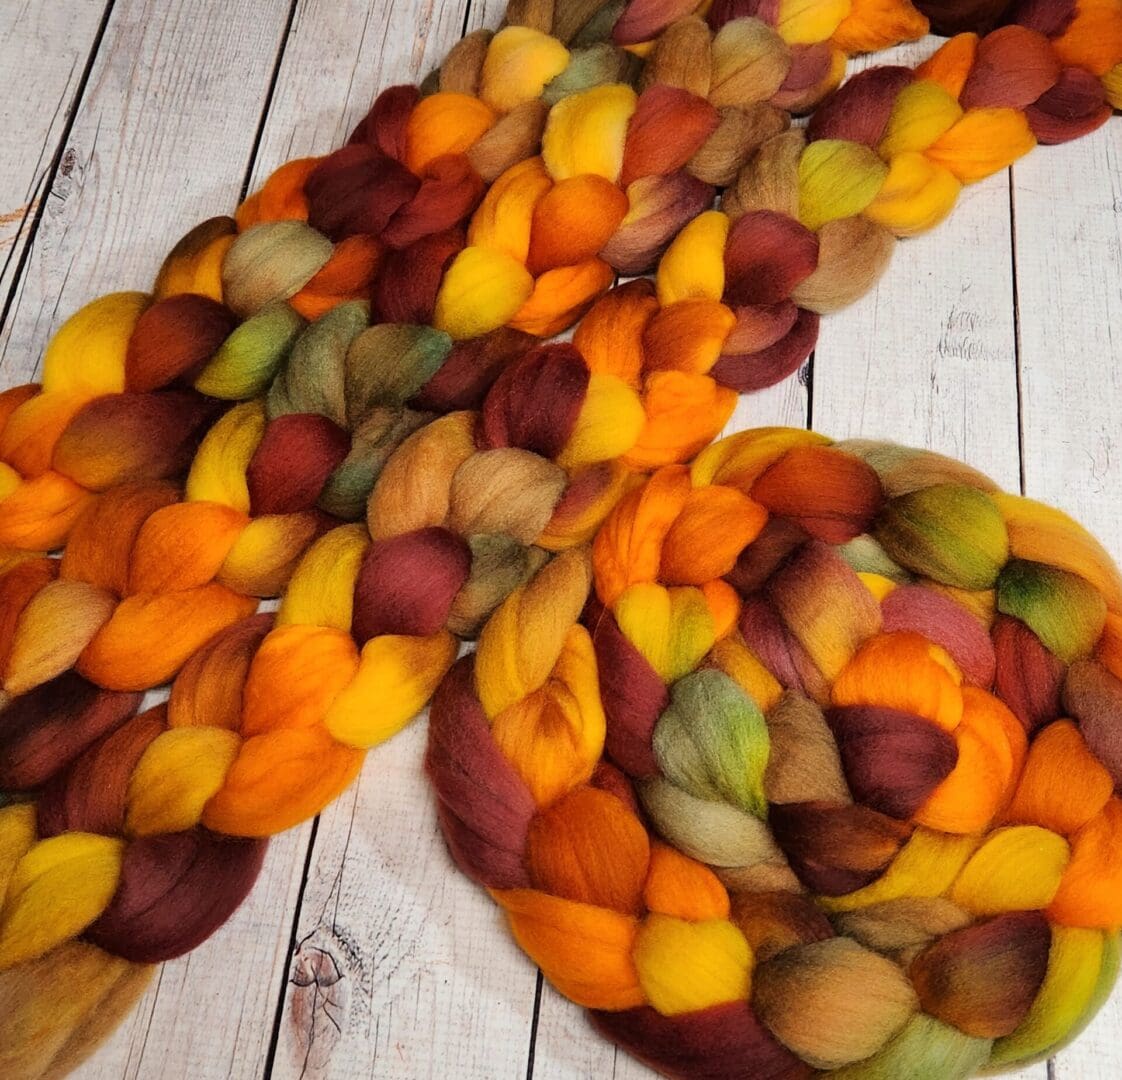 Braided yarn in autumn colors.